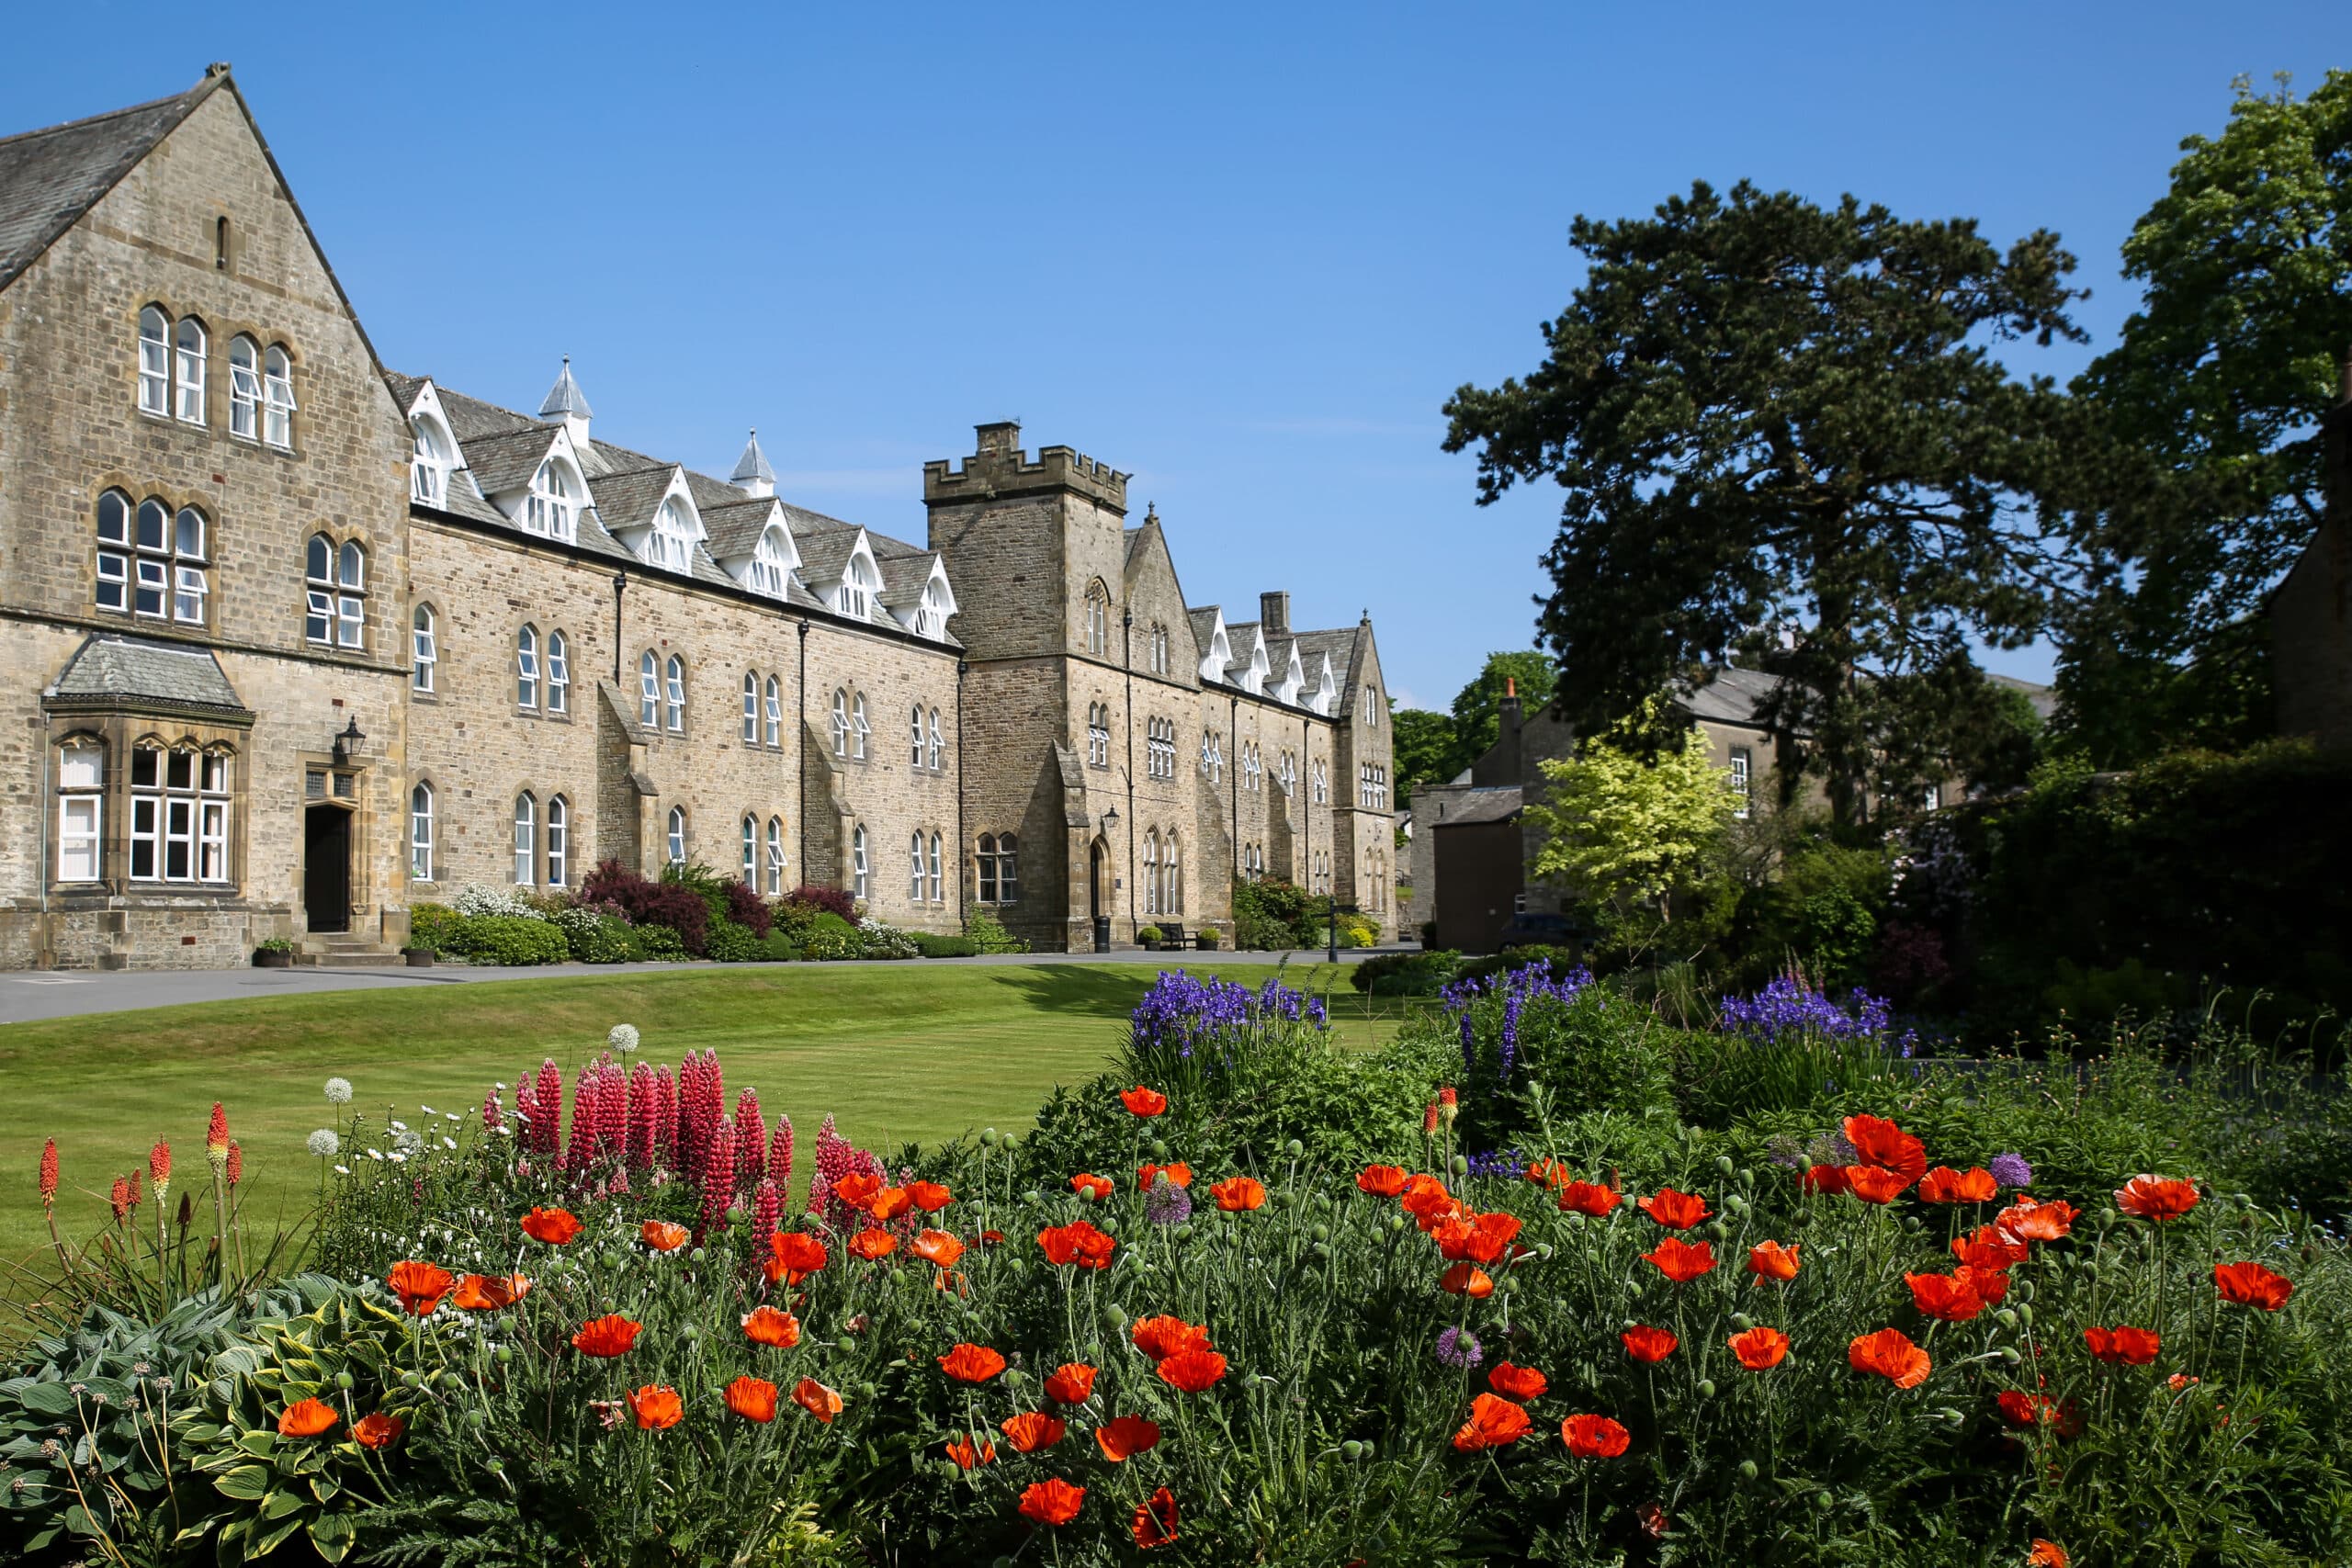 Giggleswick School: The charm of a British education, underpinned by excellence